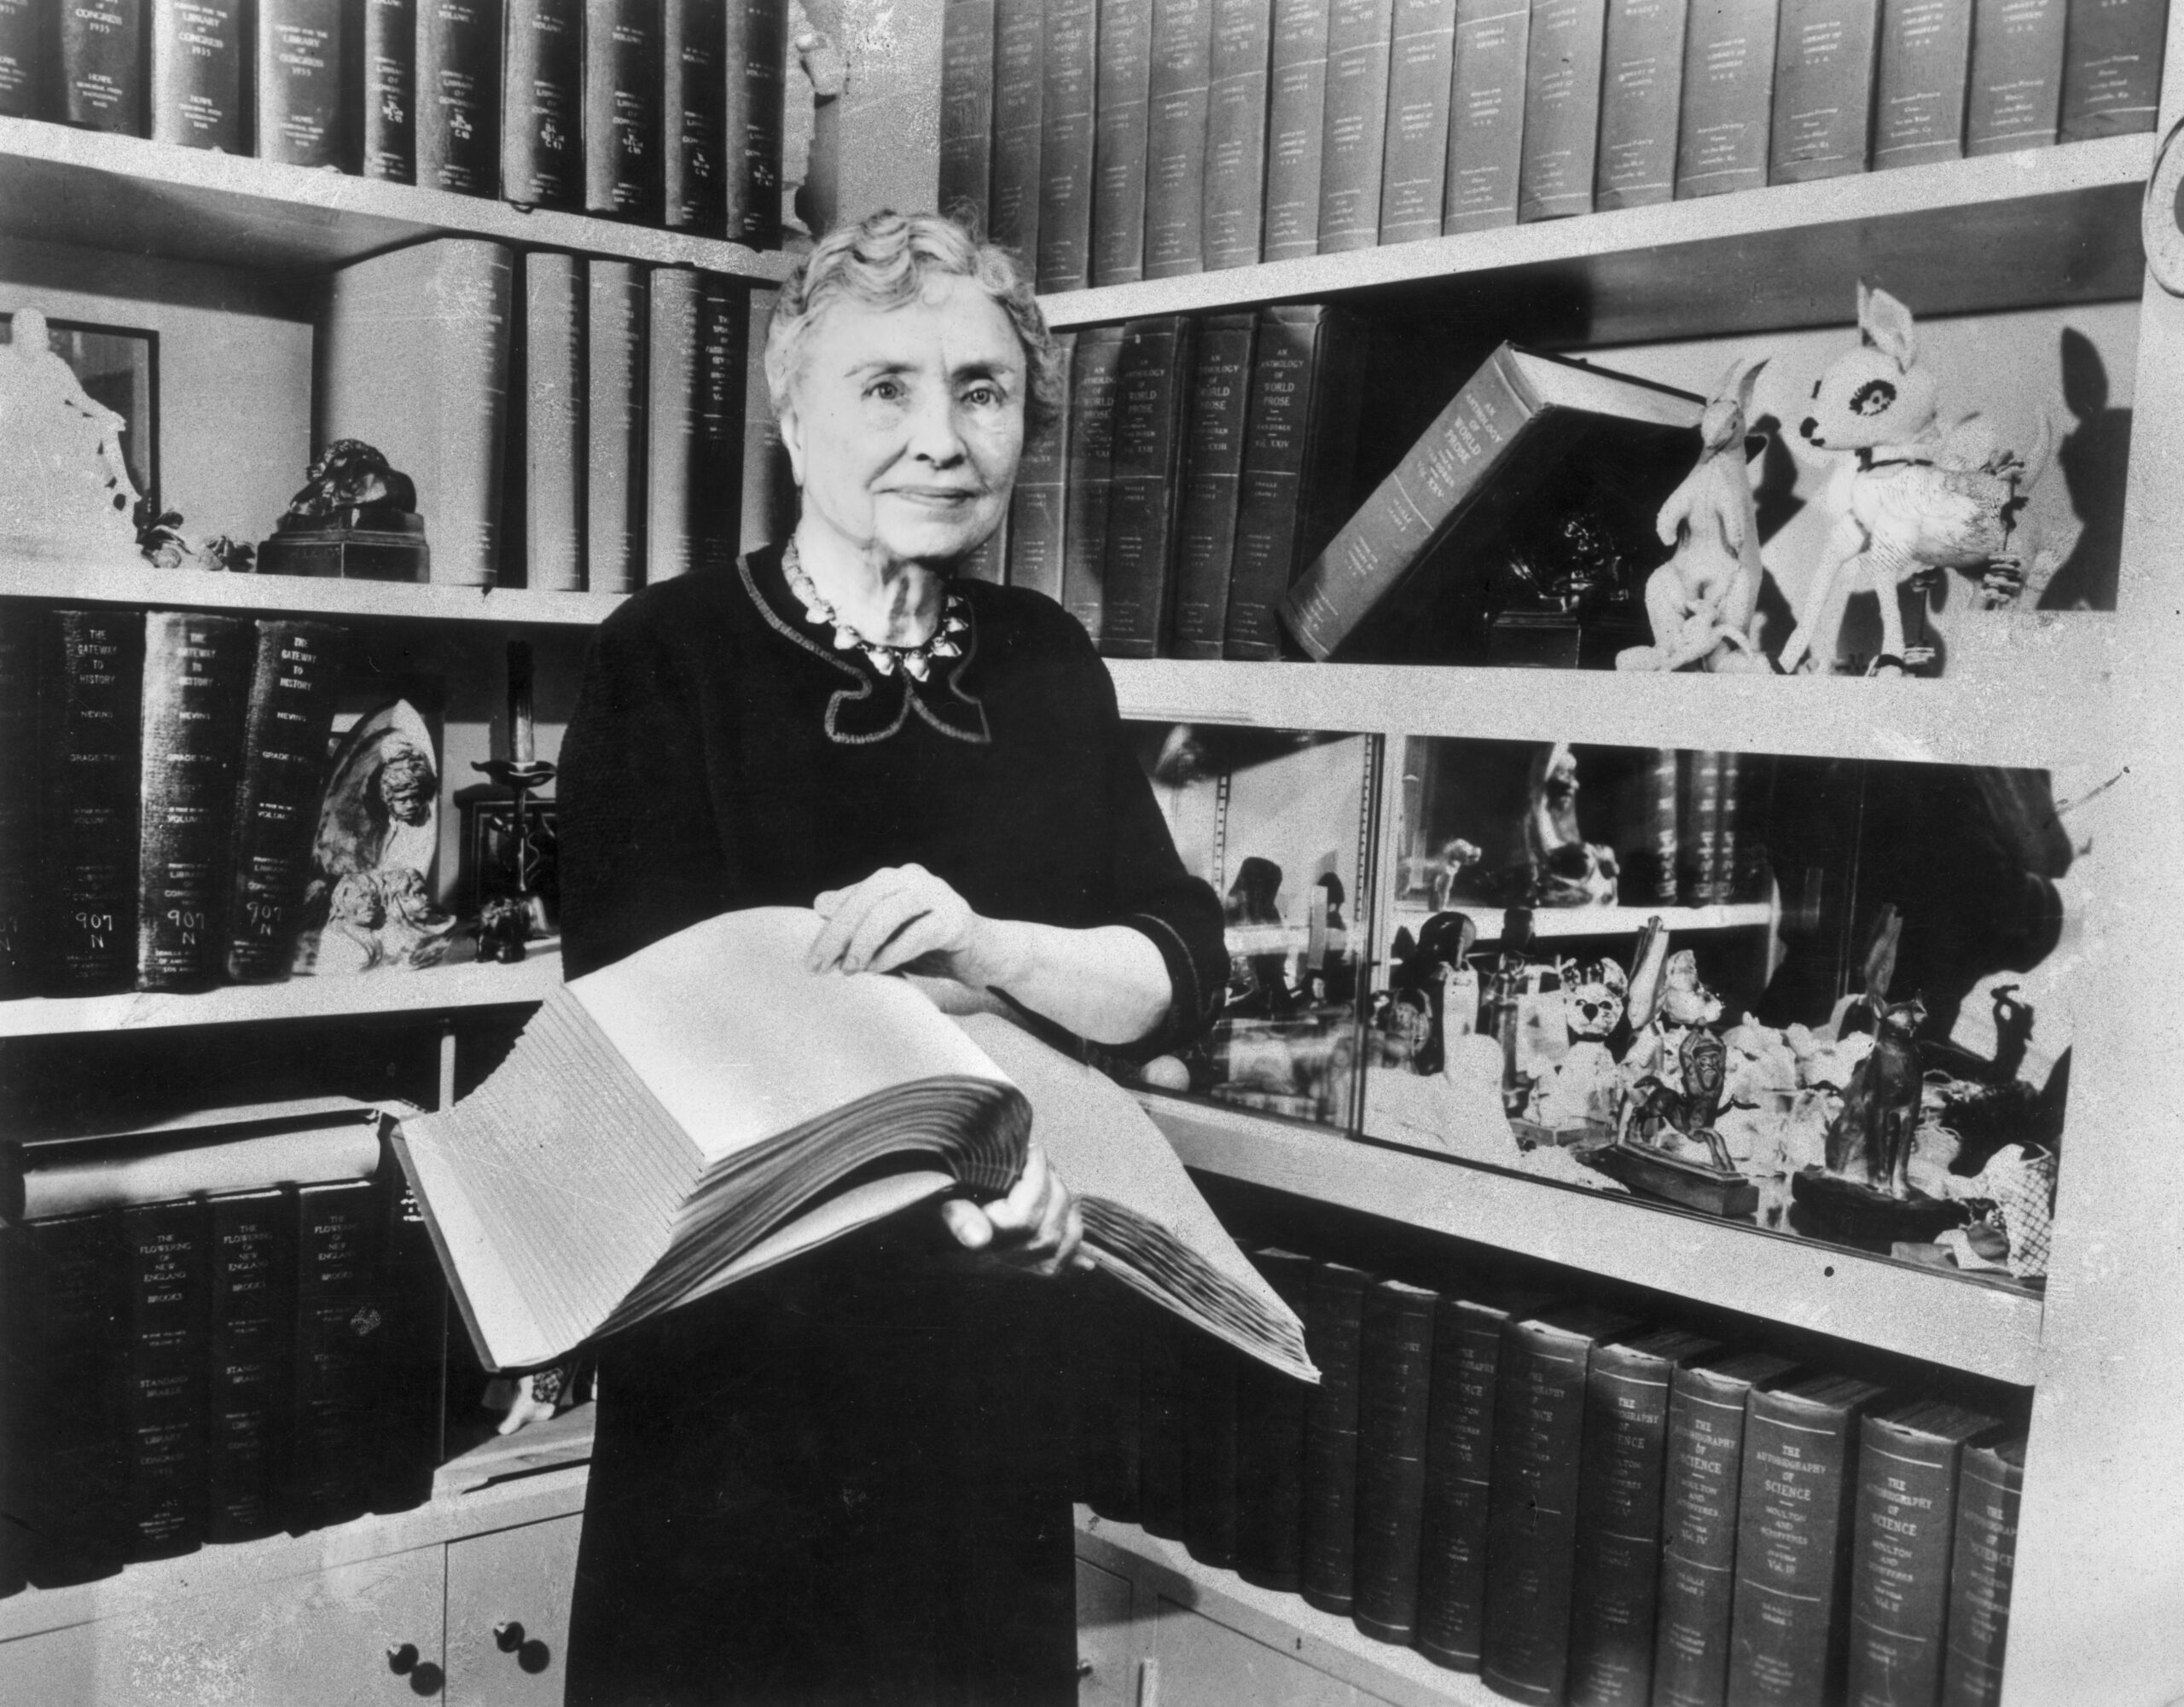 Portrait of American writer, educator and advocate for the disabled Helen Keller (1880 - 1968) holding a Braille volume and surrounded by shelves containing books and decorative figurines. A childhood illness left Keller blind, deaf and mute. (Photo by Hulton Archive/Getty Images)